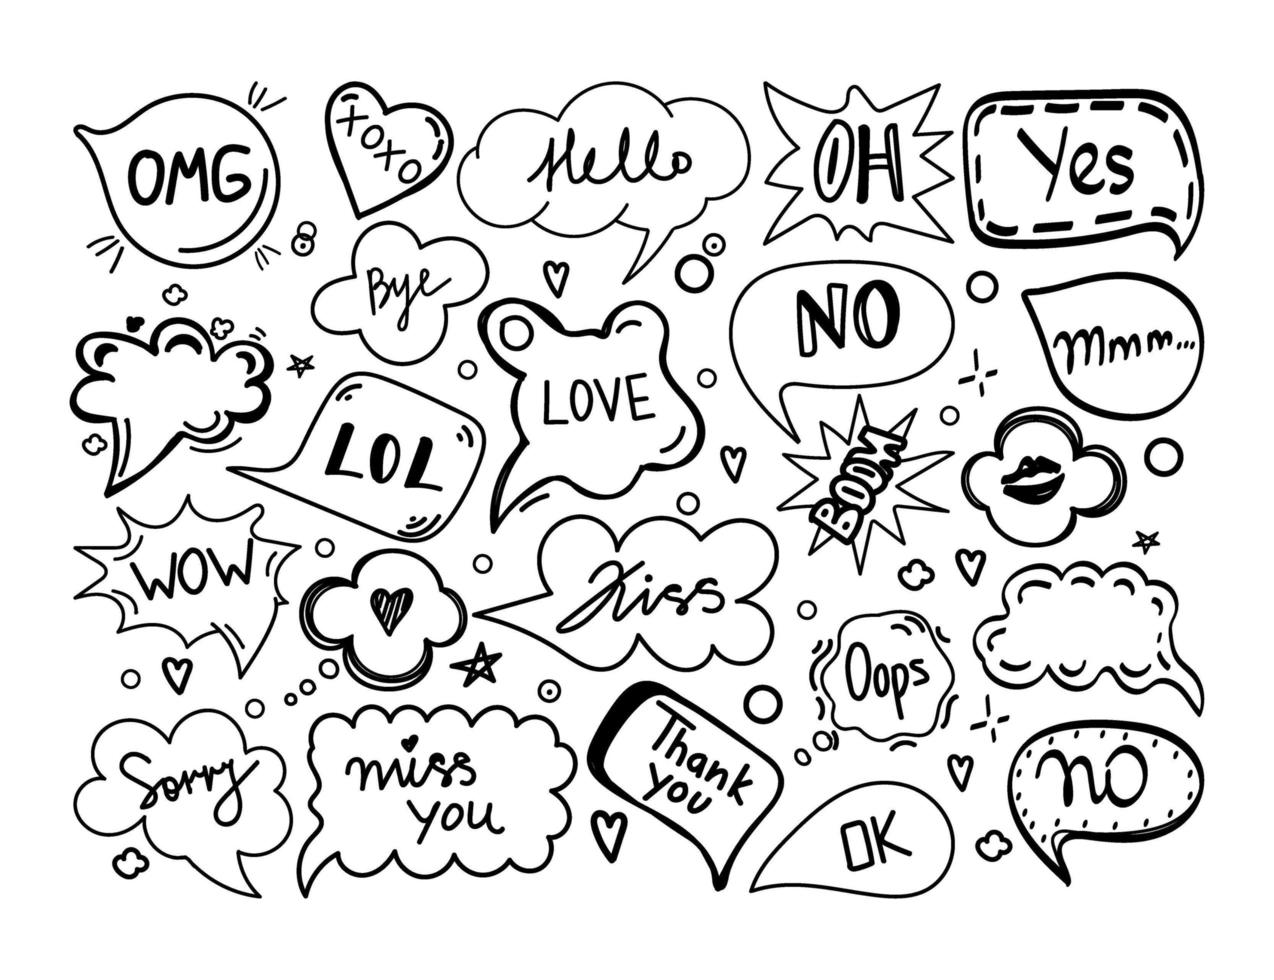 A set of speech bubbles with hand-drawn doodle-style dialogue words. Hello, Love, Sorry, Love, Kiss, No, Bye, OMG, kiss trail, boom, lol. Speech templates. Vector illustration.